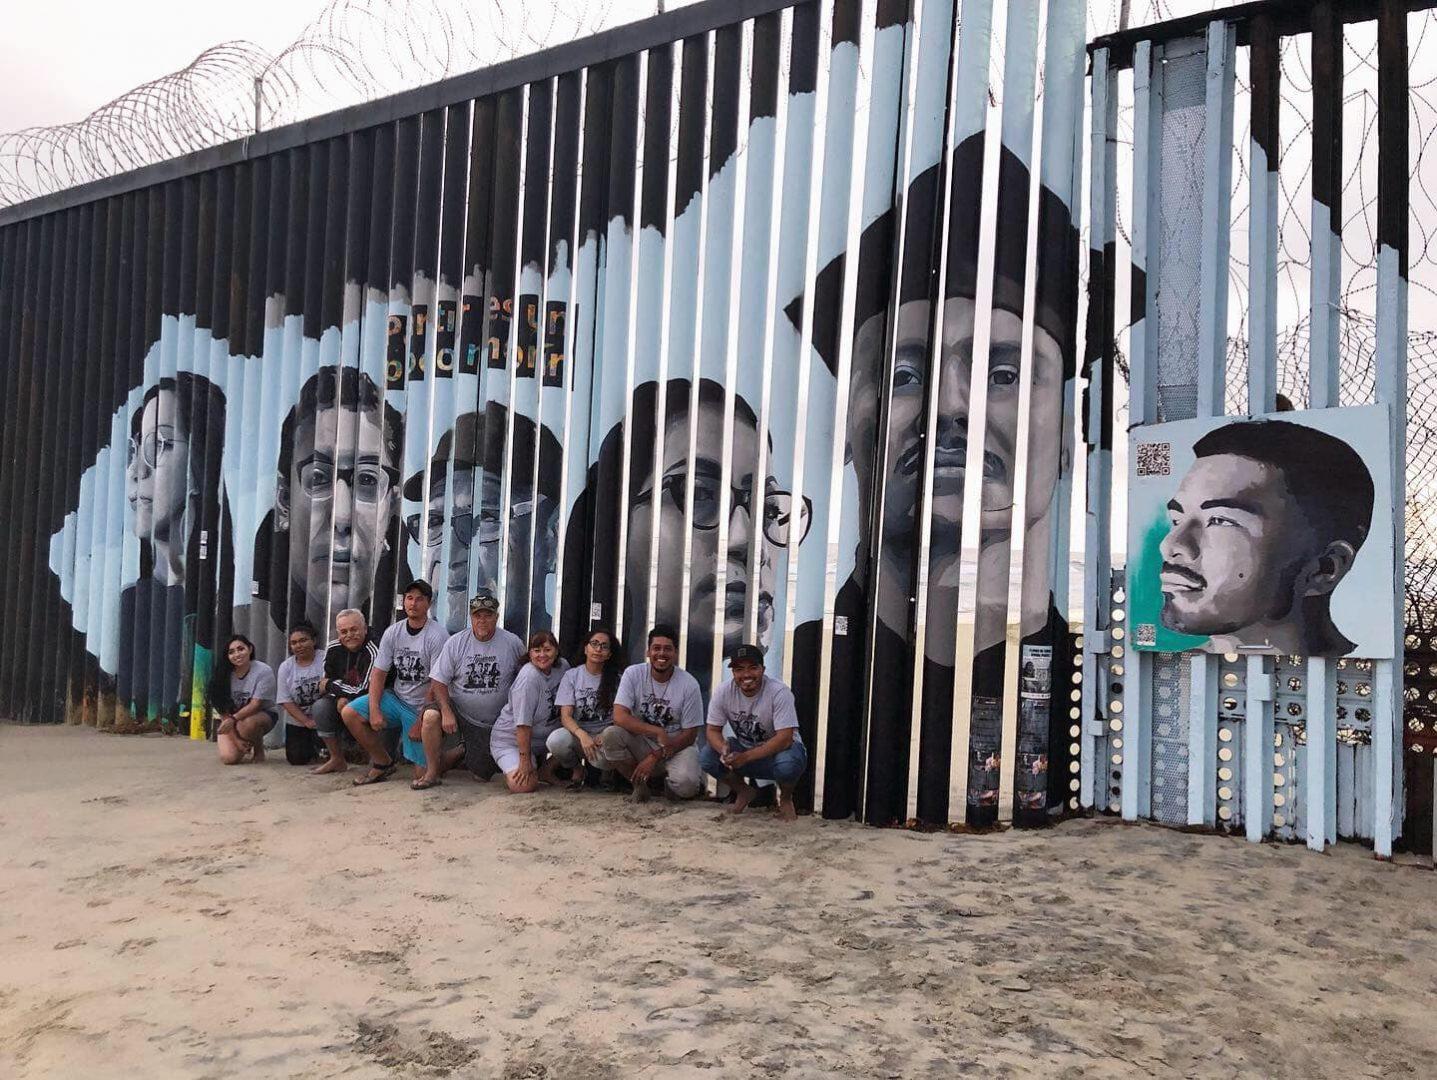 Volunteers pose for a photo in front of the completed mural on August 9, 2019, at Playas de Tijuana. (Courtesy of Lizbeth De La Cruz Santana)